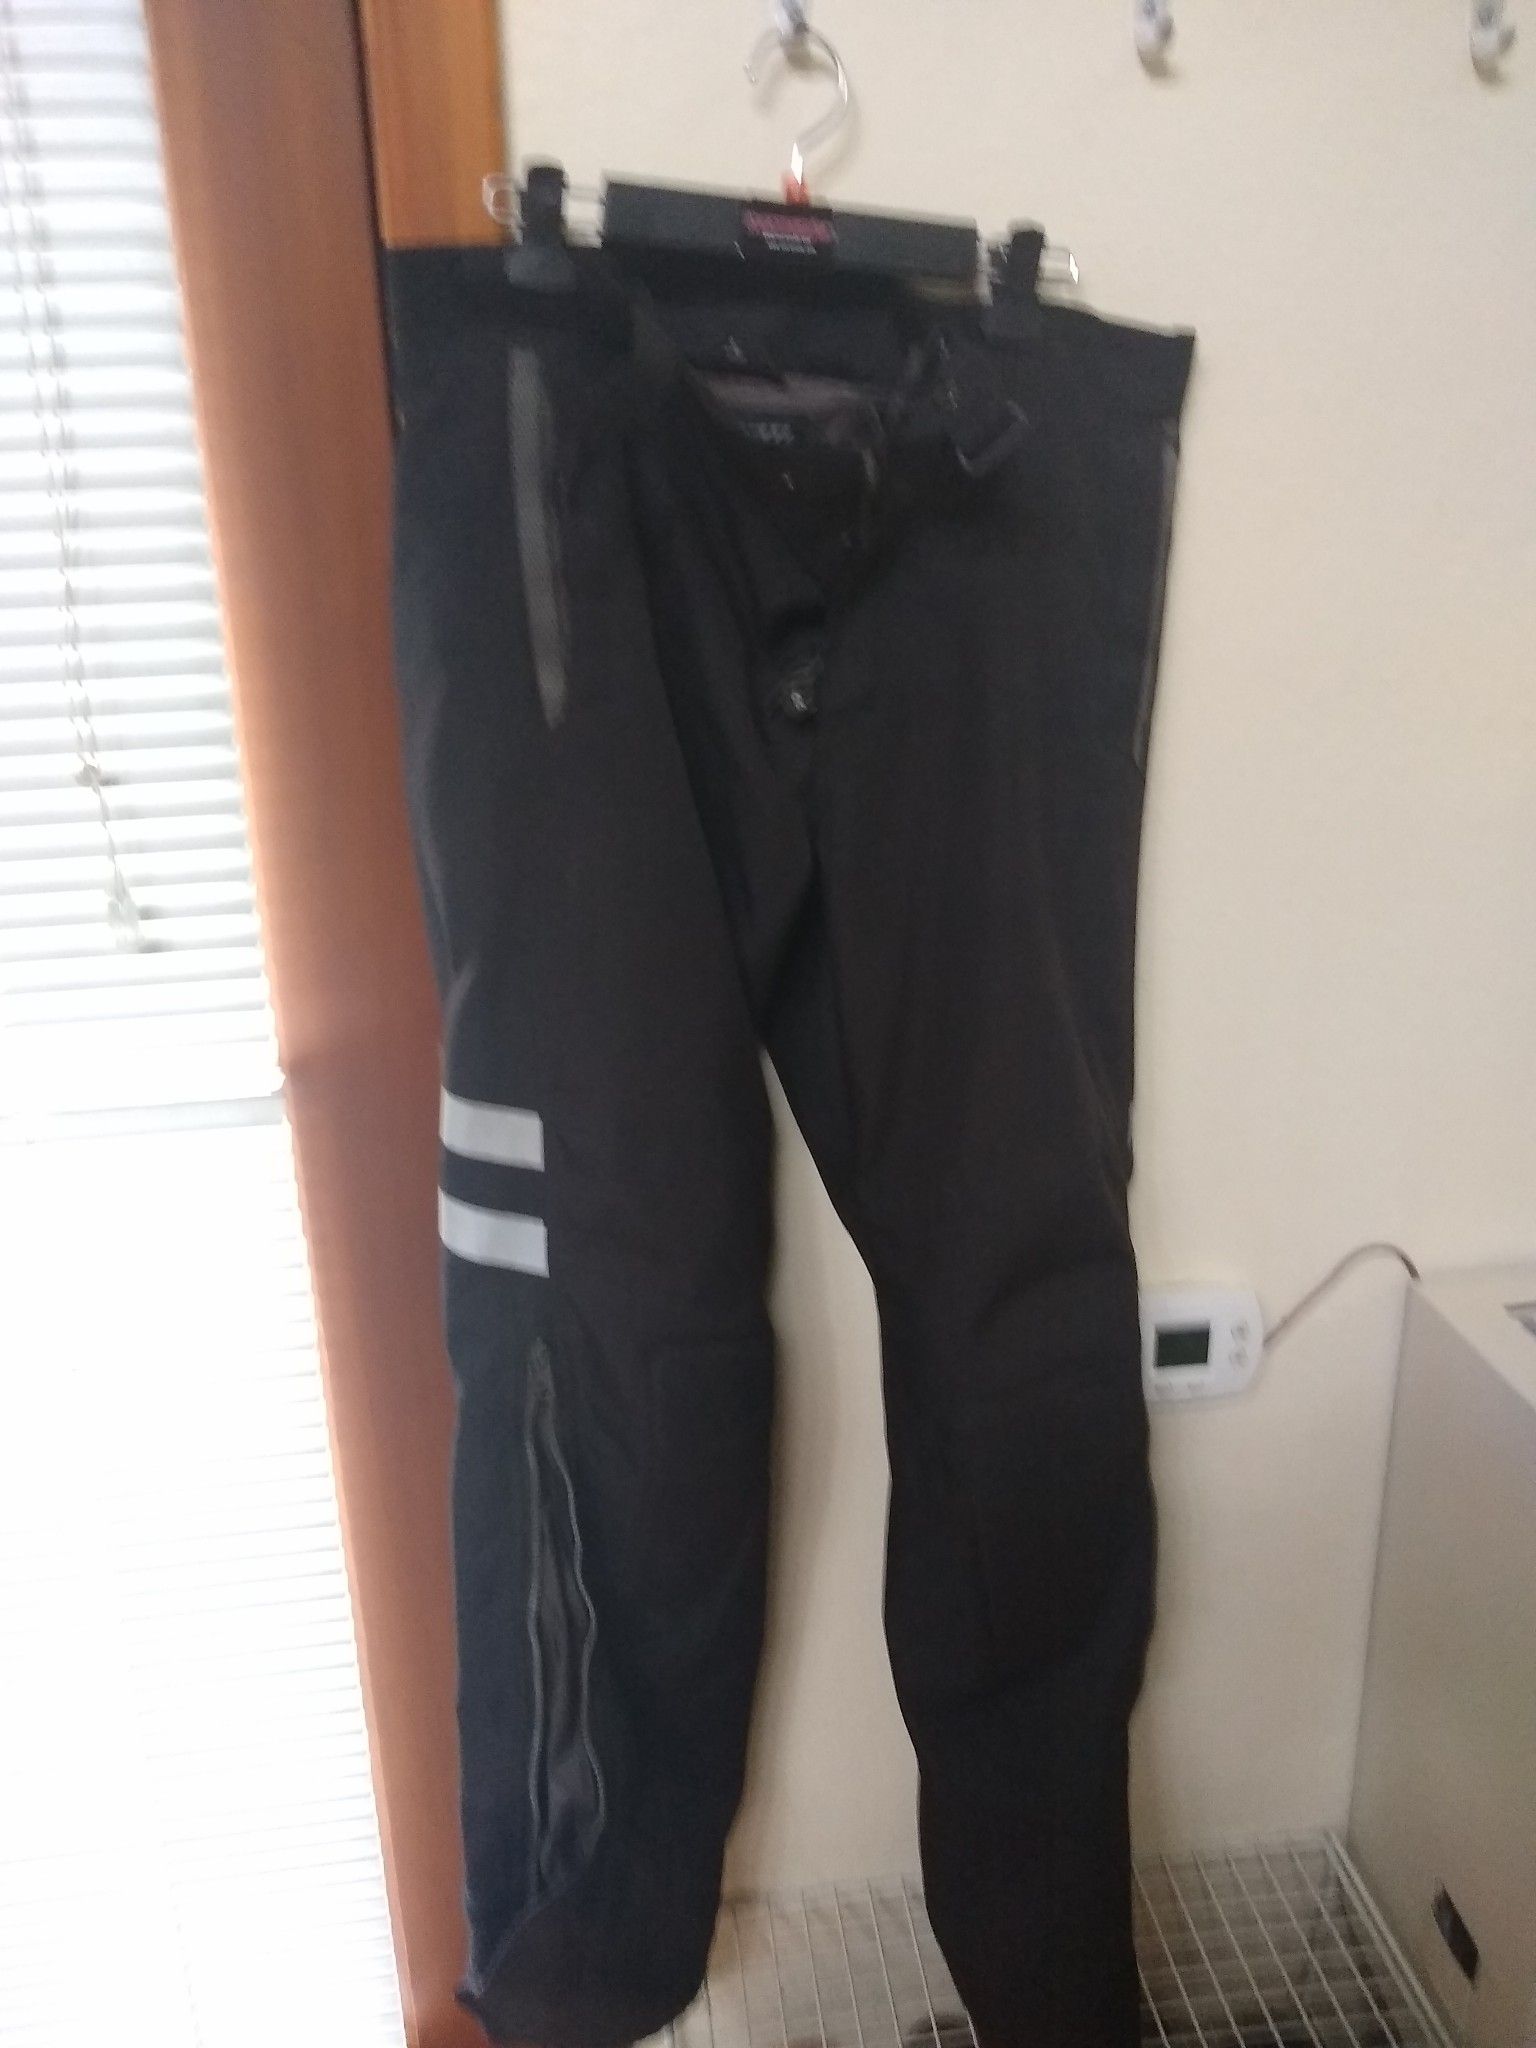 Rev'it motorcycle overpants, size 34 long